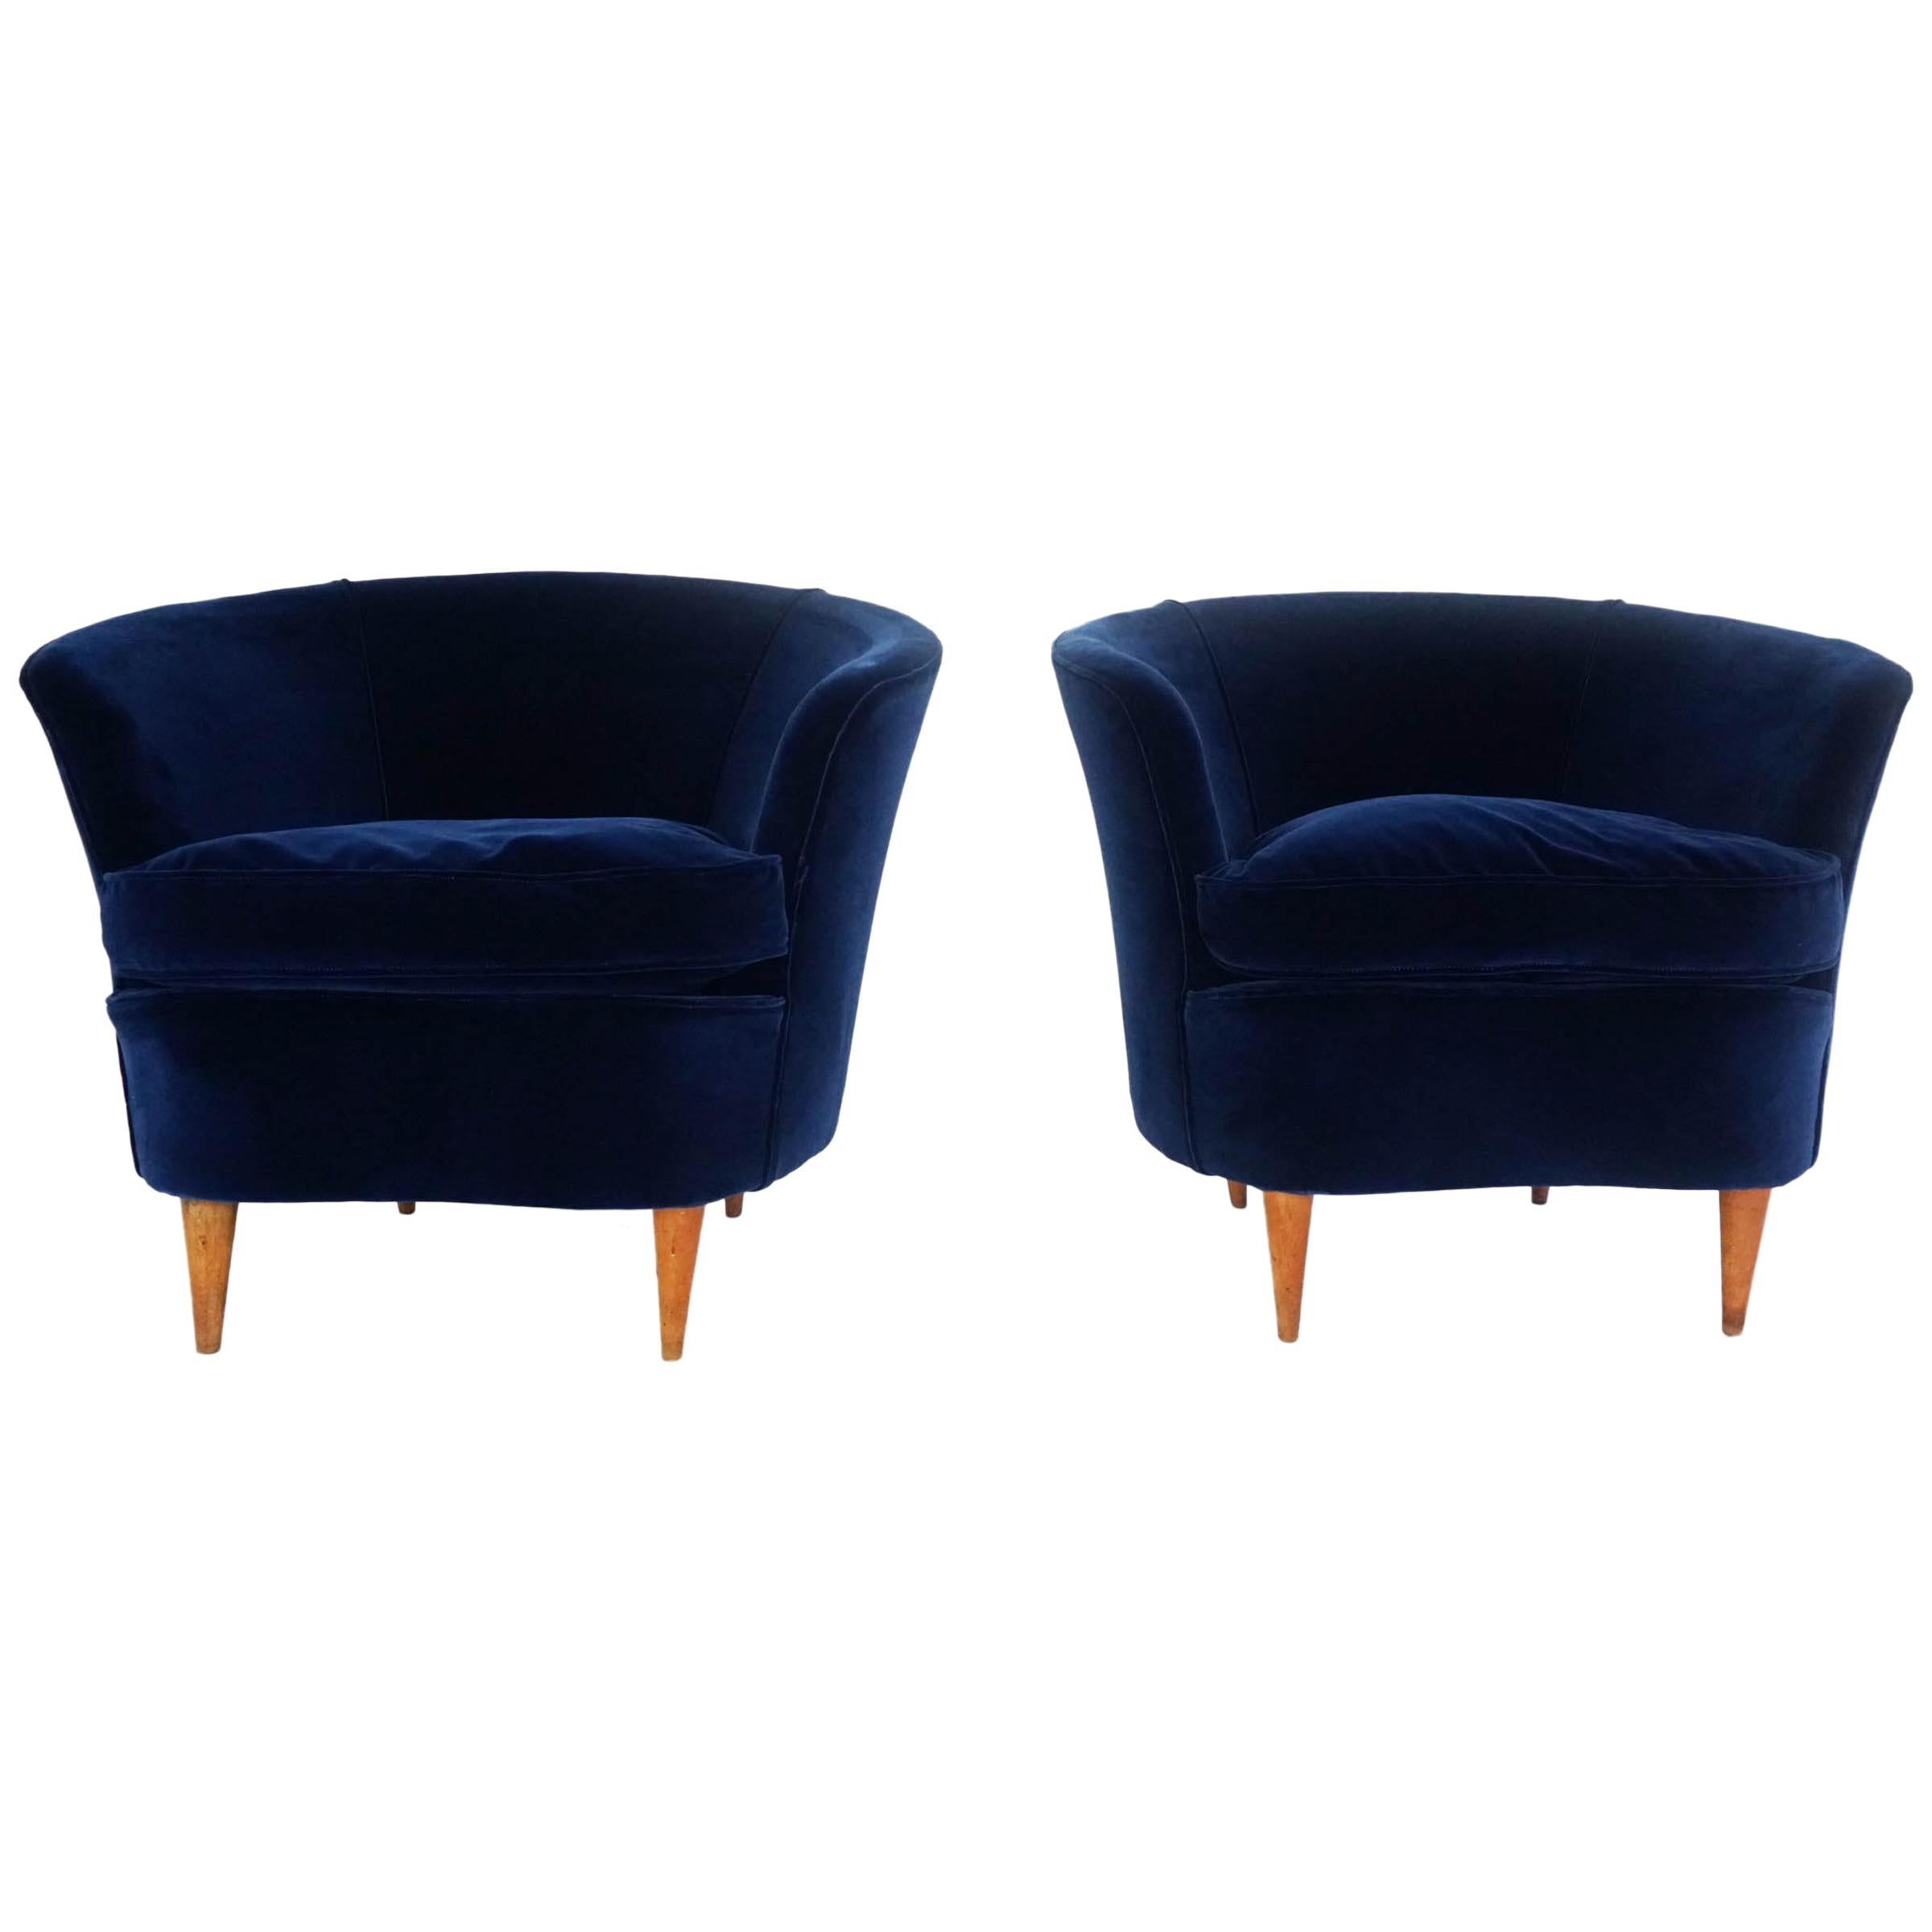 Gio Ponti Attributed, Pair of Cozy 'Shell' Armchairs